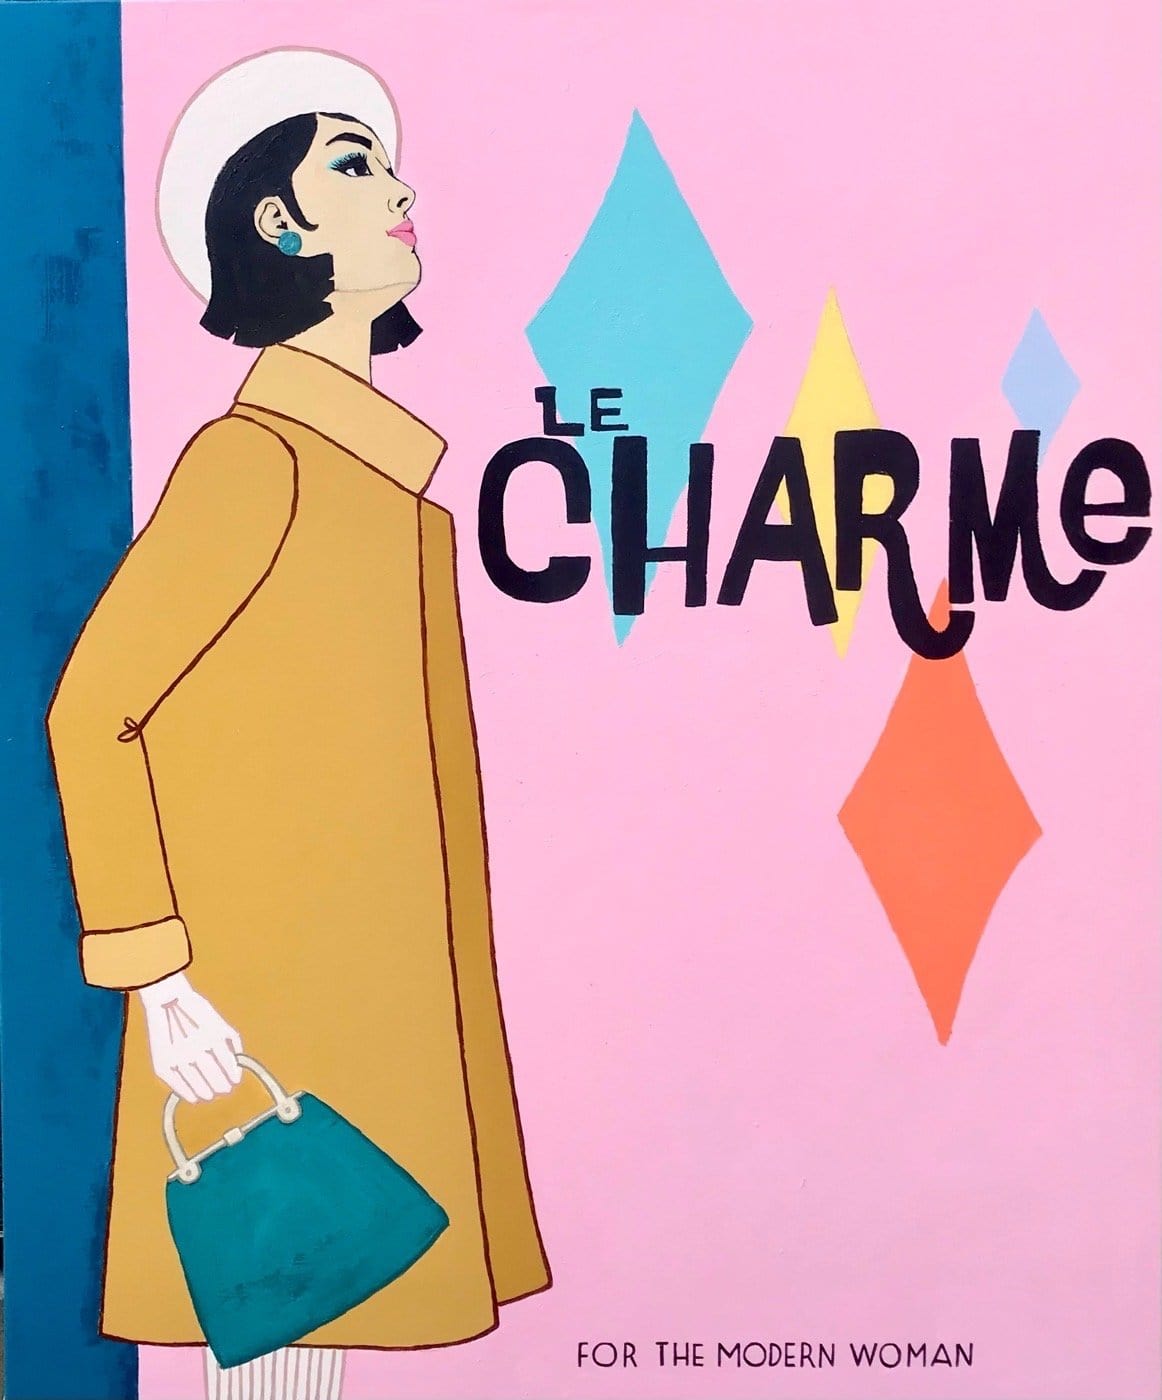 Le Charme - Limited Edition Print